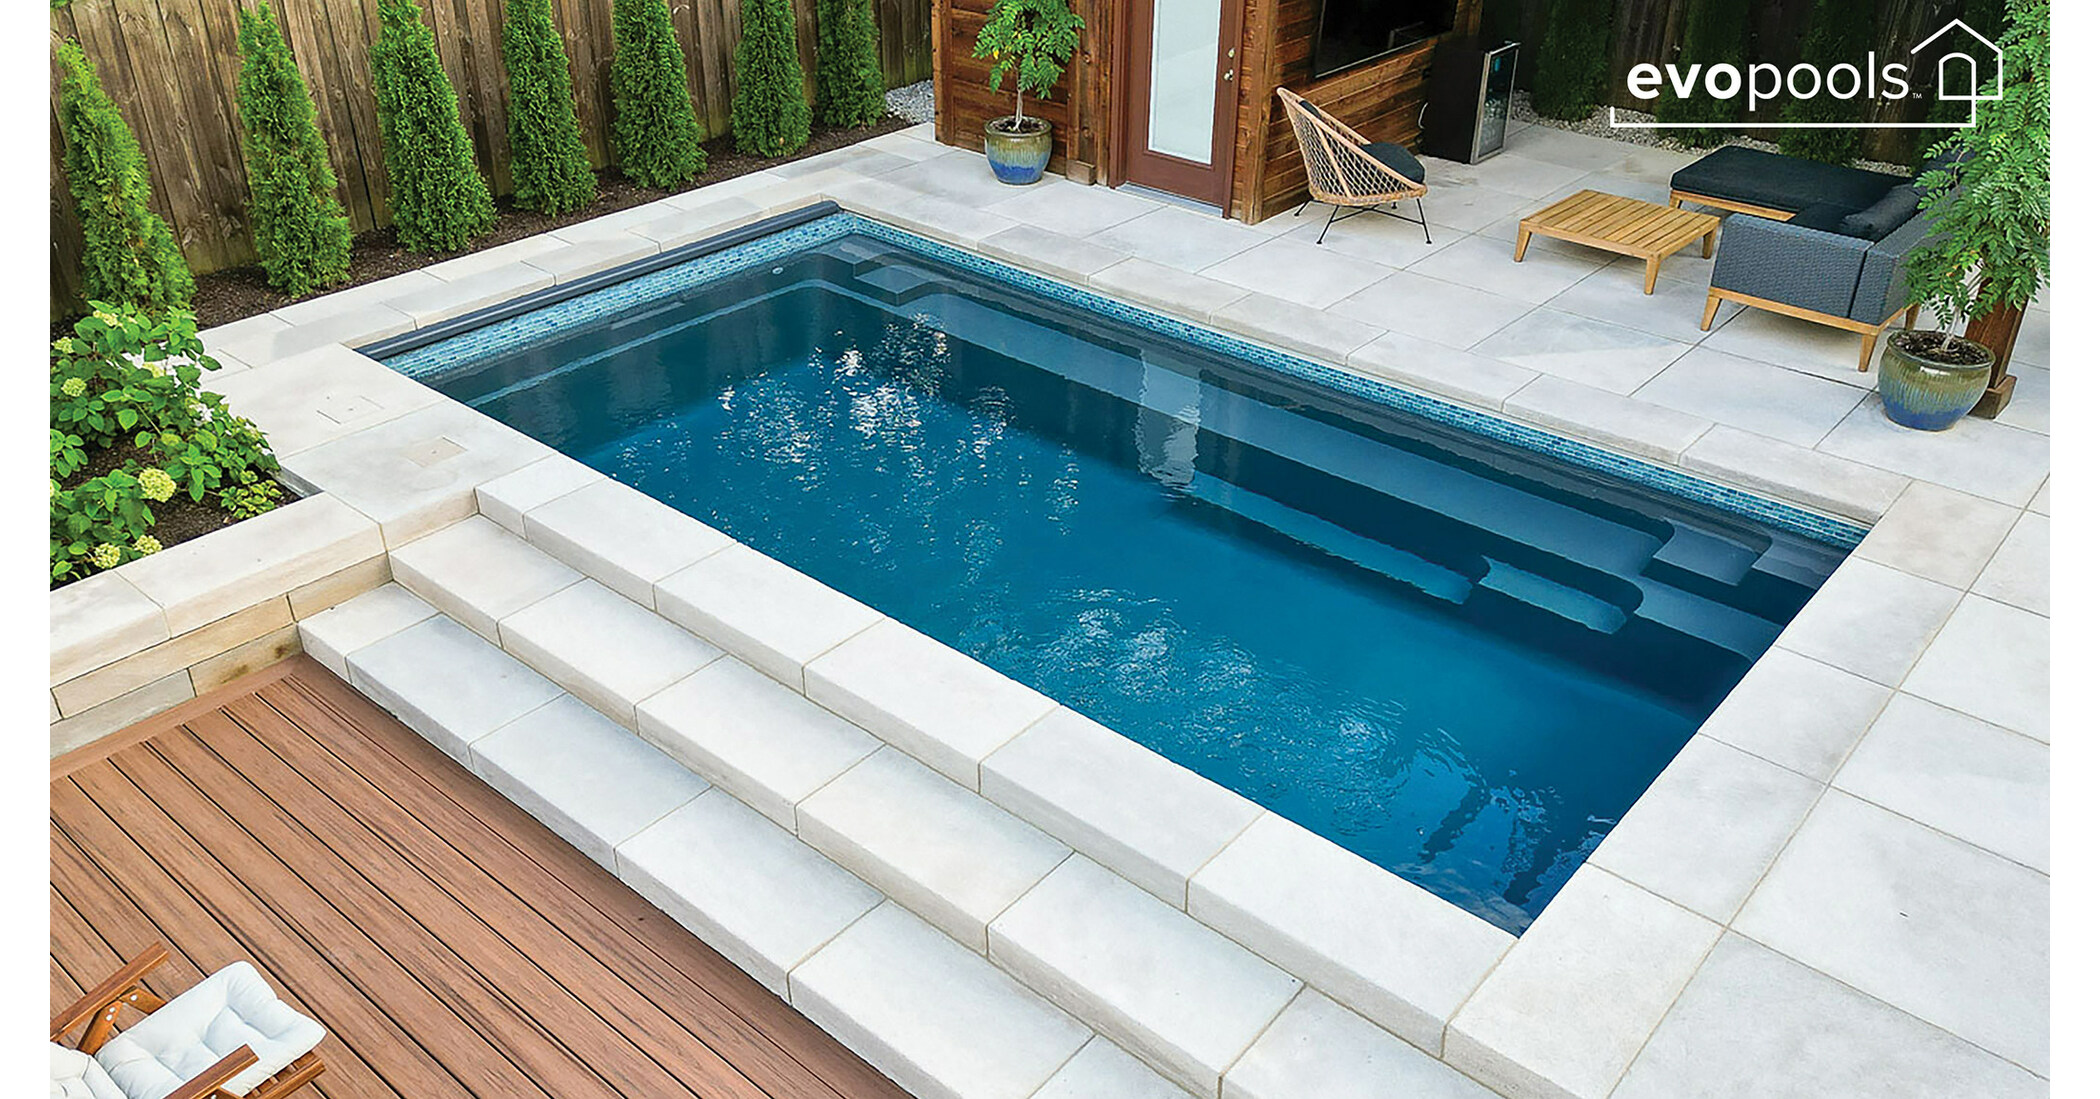 Explore Industries Launches the New Evo Pools™ Brand